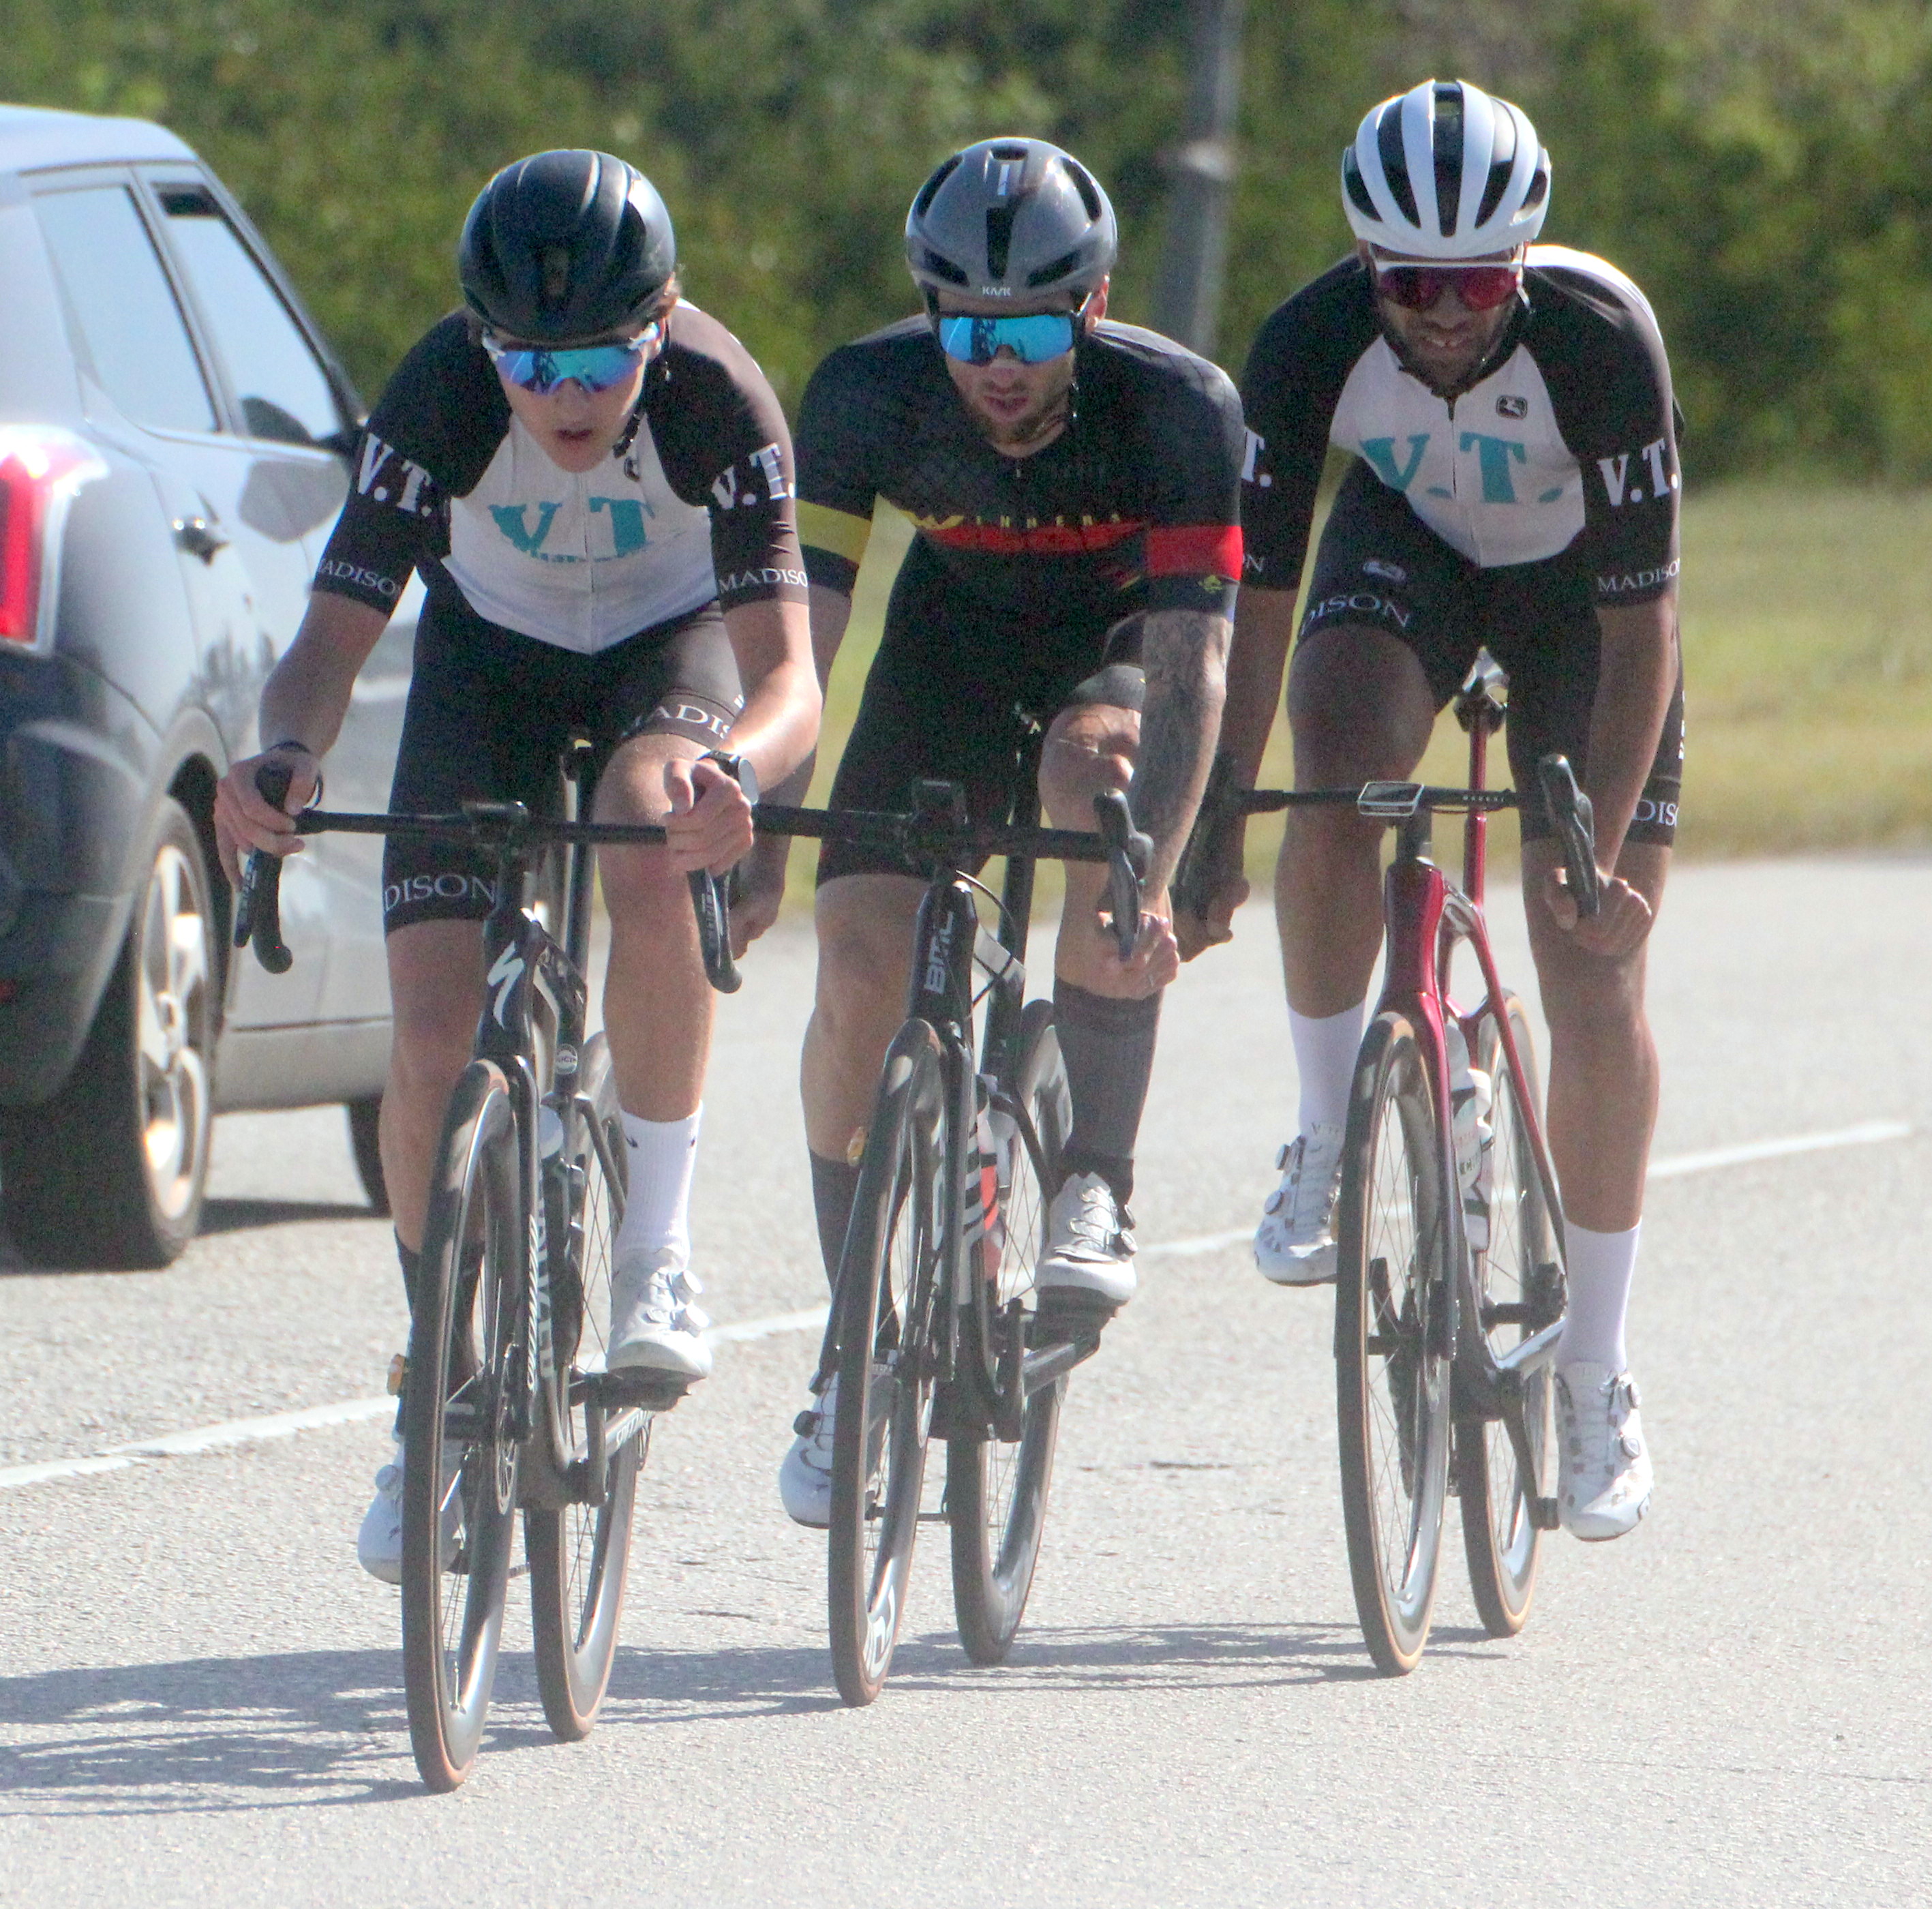 Bermuda Cyclist Local & Abroad Round-Up (Cycling)